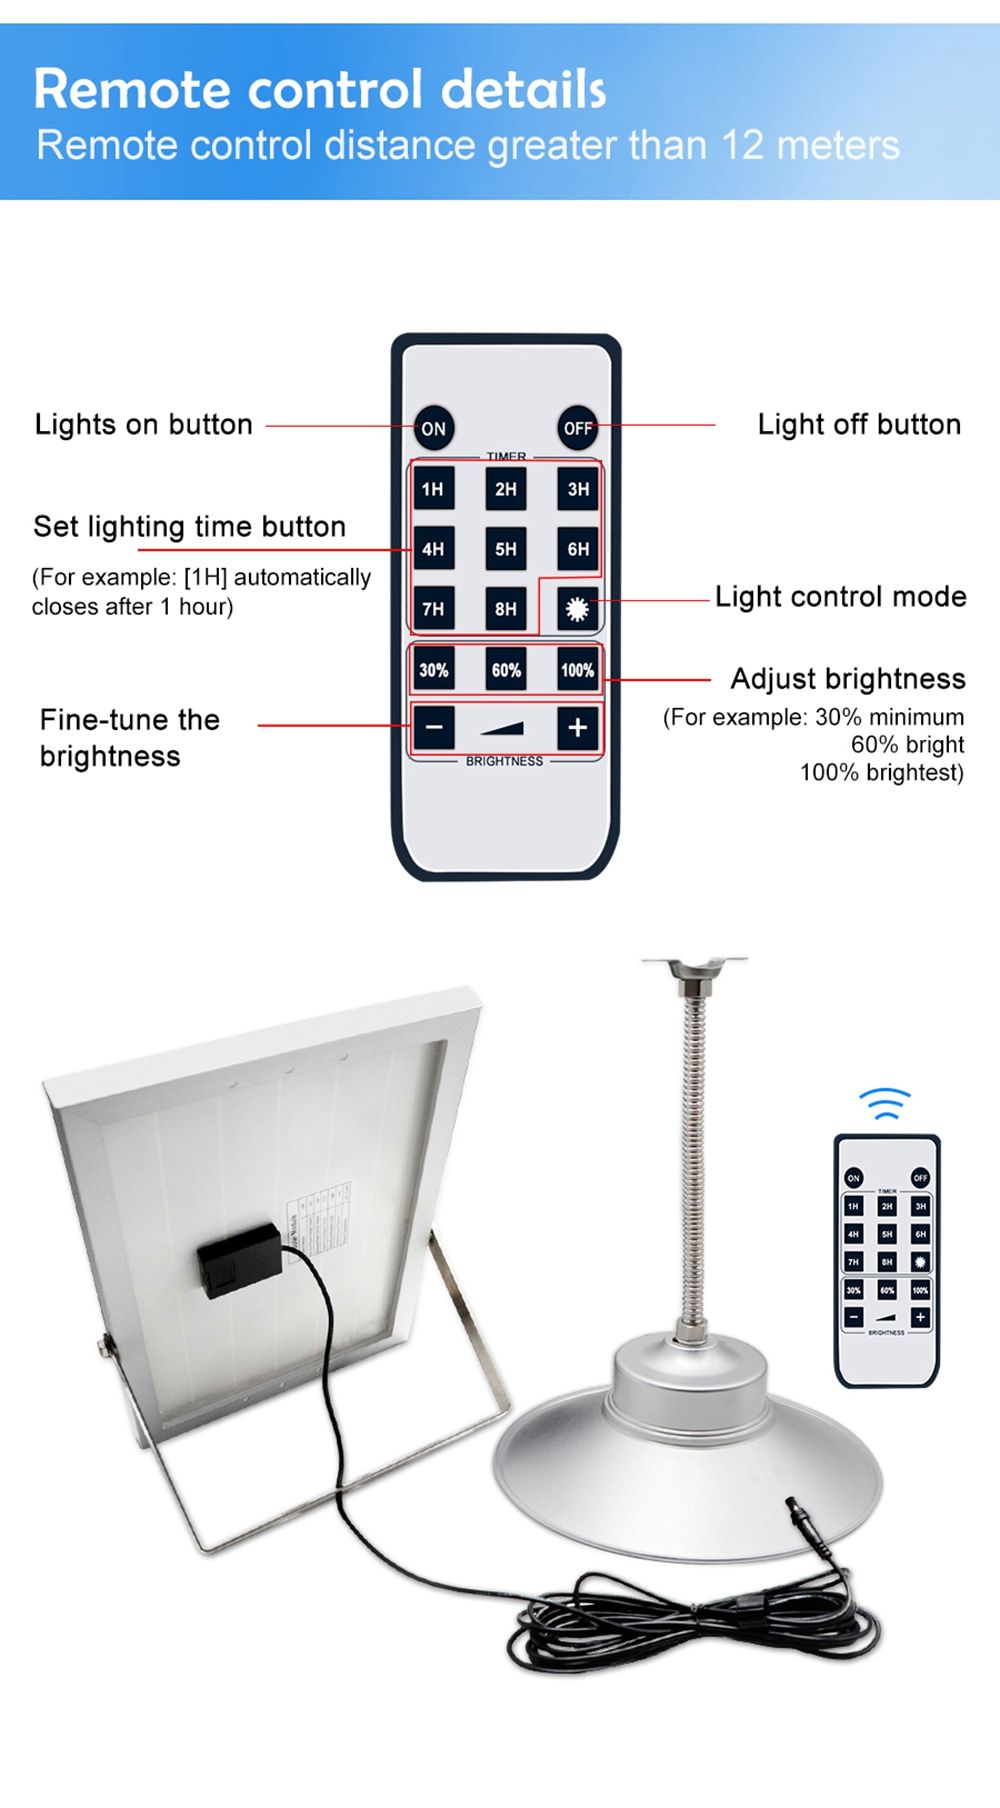 Solar-Powered-36-LED-Outdoor-Indoor-Hanging-Light-Camping-Pendant-Lamp-with-Remote-Control-for-Garde-1416592